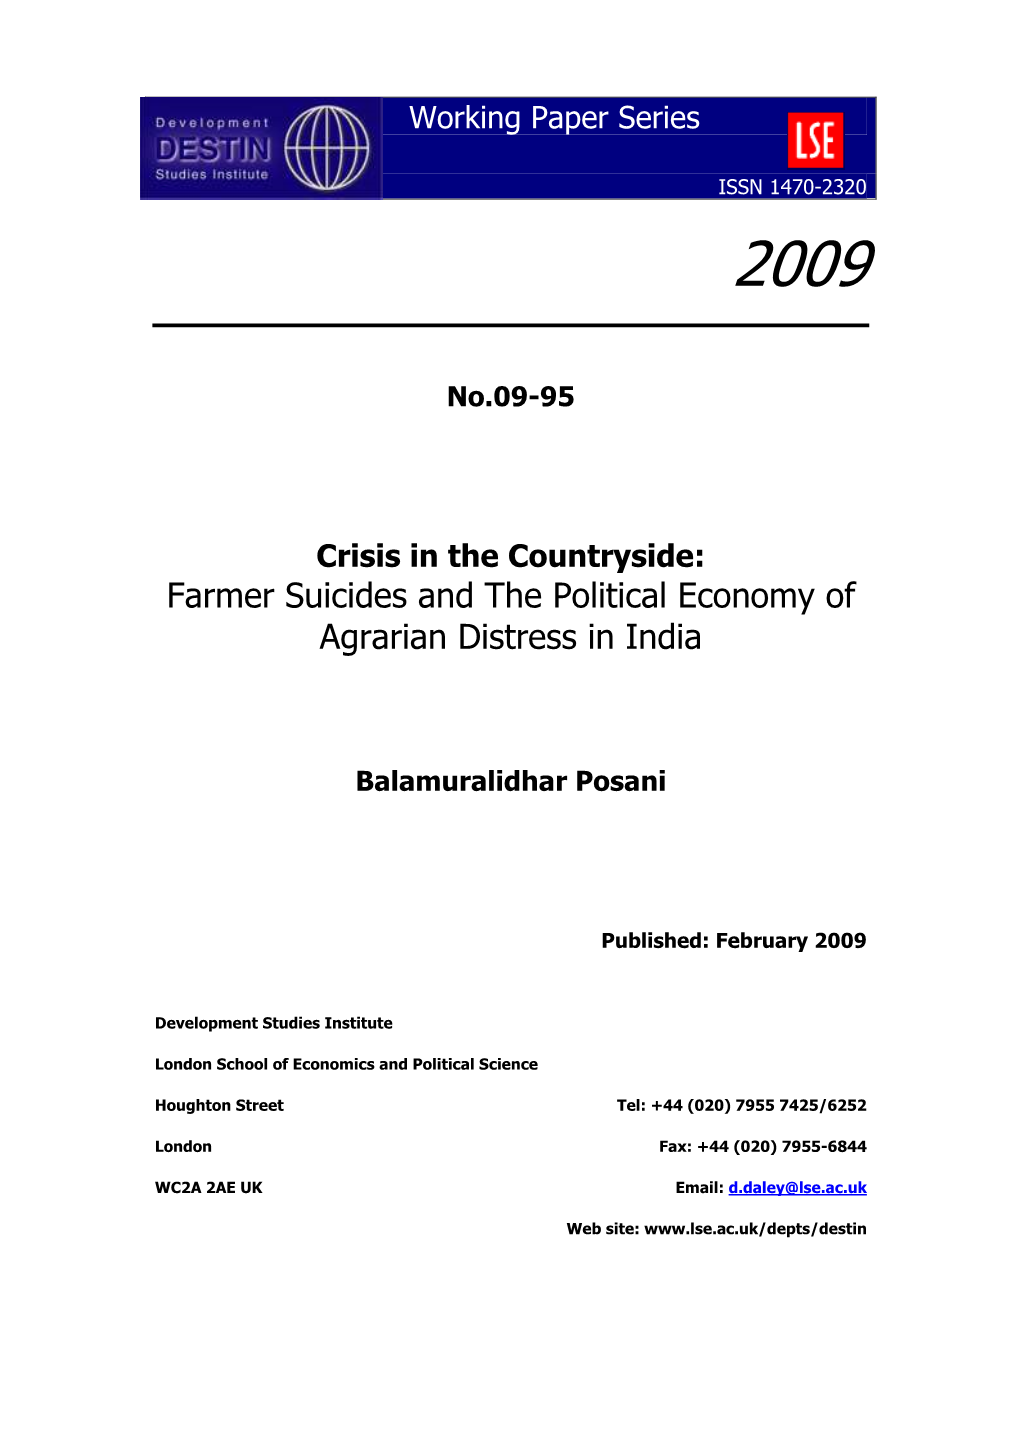 Farmer Suicides and the Political Economy of Agrarian Distress in India